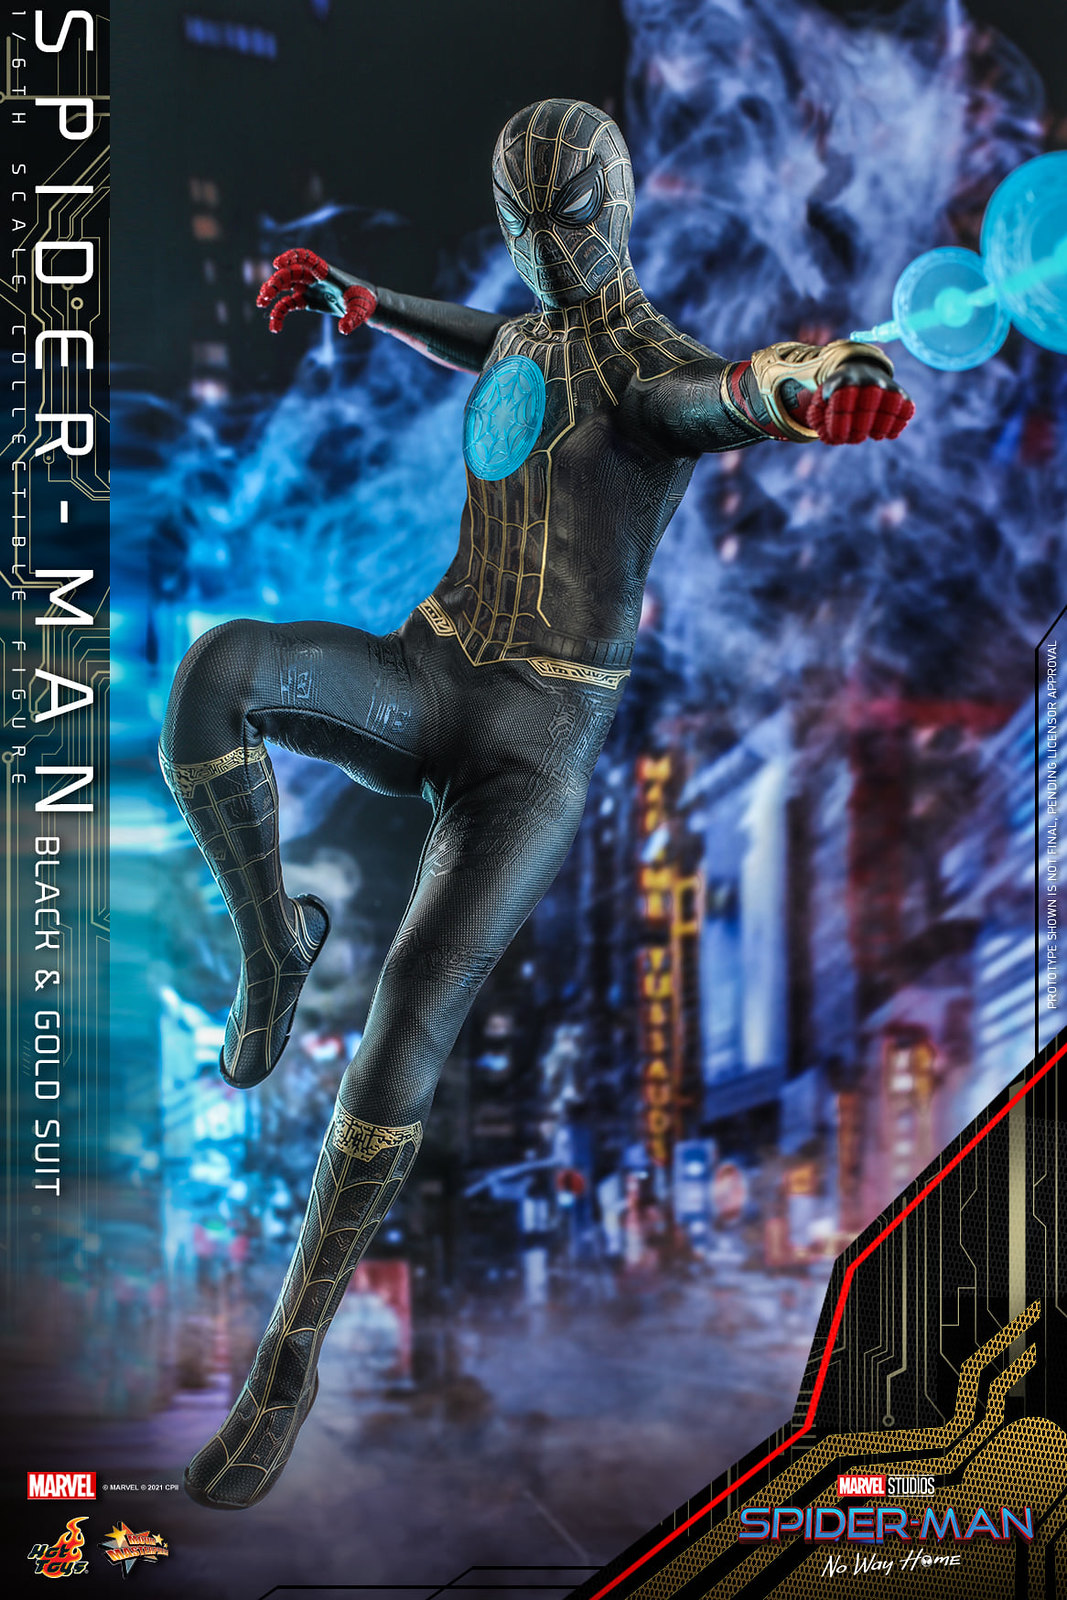 NEW PRODUCT: Hot Toys 【Spider-Man: No Way Home - 1/6th scale Spider-Man (Black & Gold Suit) Collectible Figure】 51311269536_683013a5f8_h